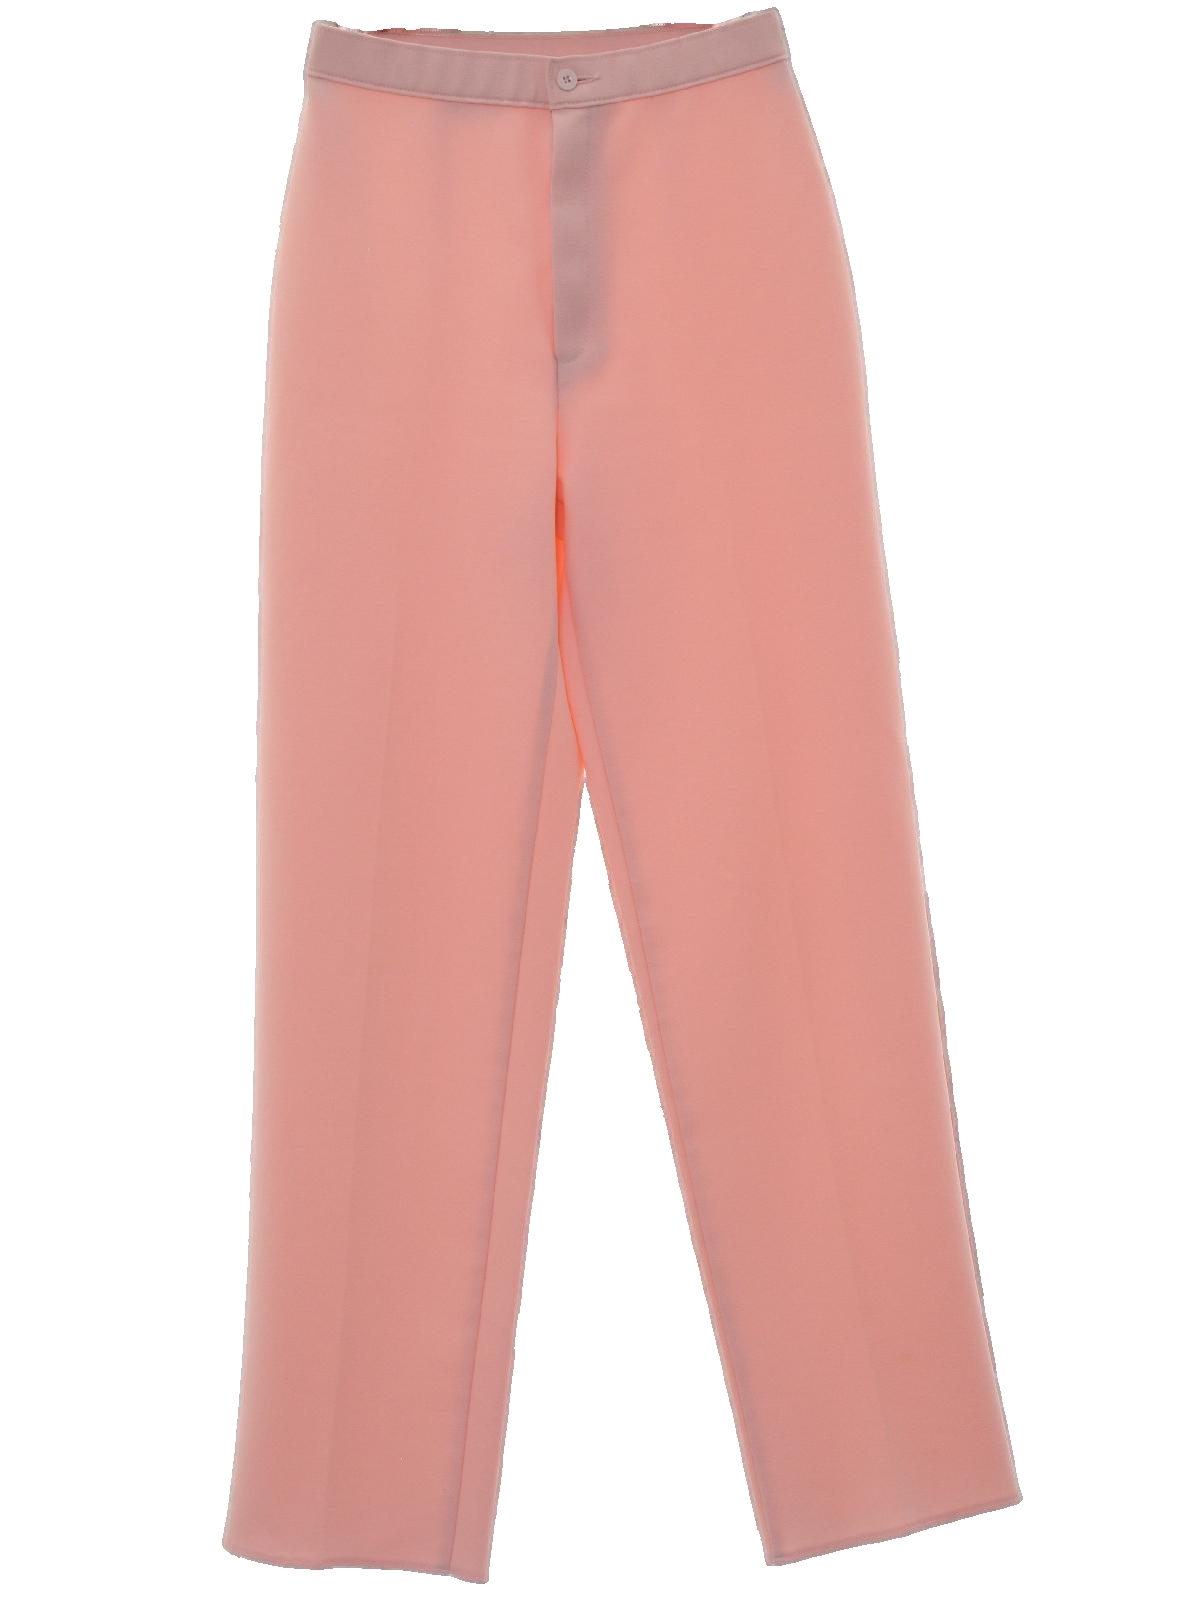 1980s Vintage Pants: 80s -Bend Over by Levi Strauss- Womens soft peachy  pink solid colored polyester flat front, slightly tapered leg knit pants  with cuffless hem, no front pockets, no rear pockets,